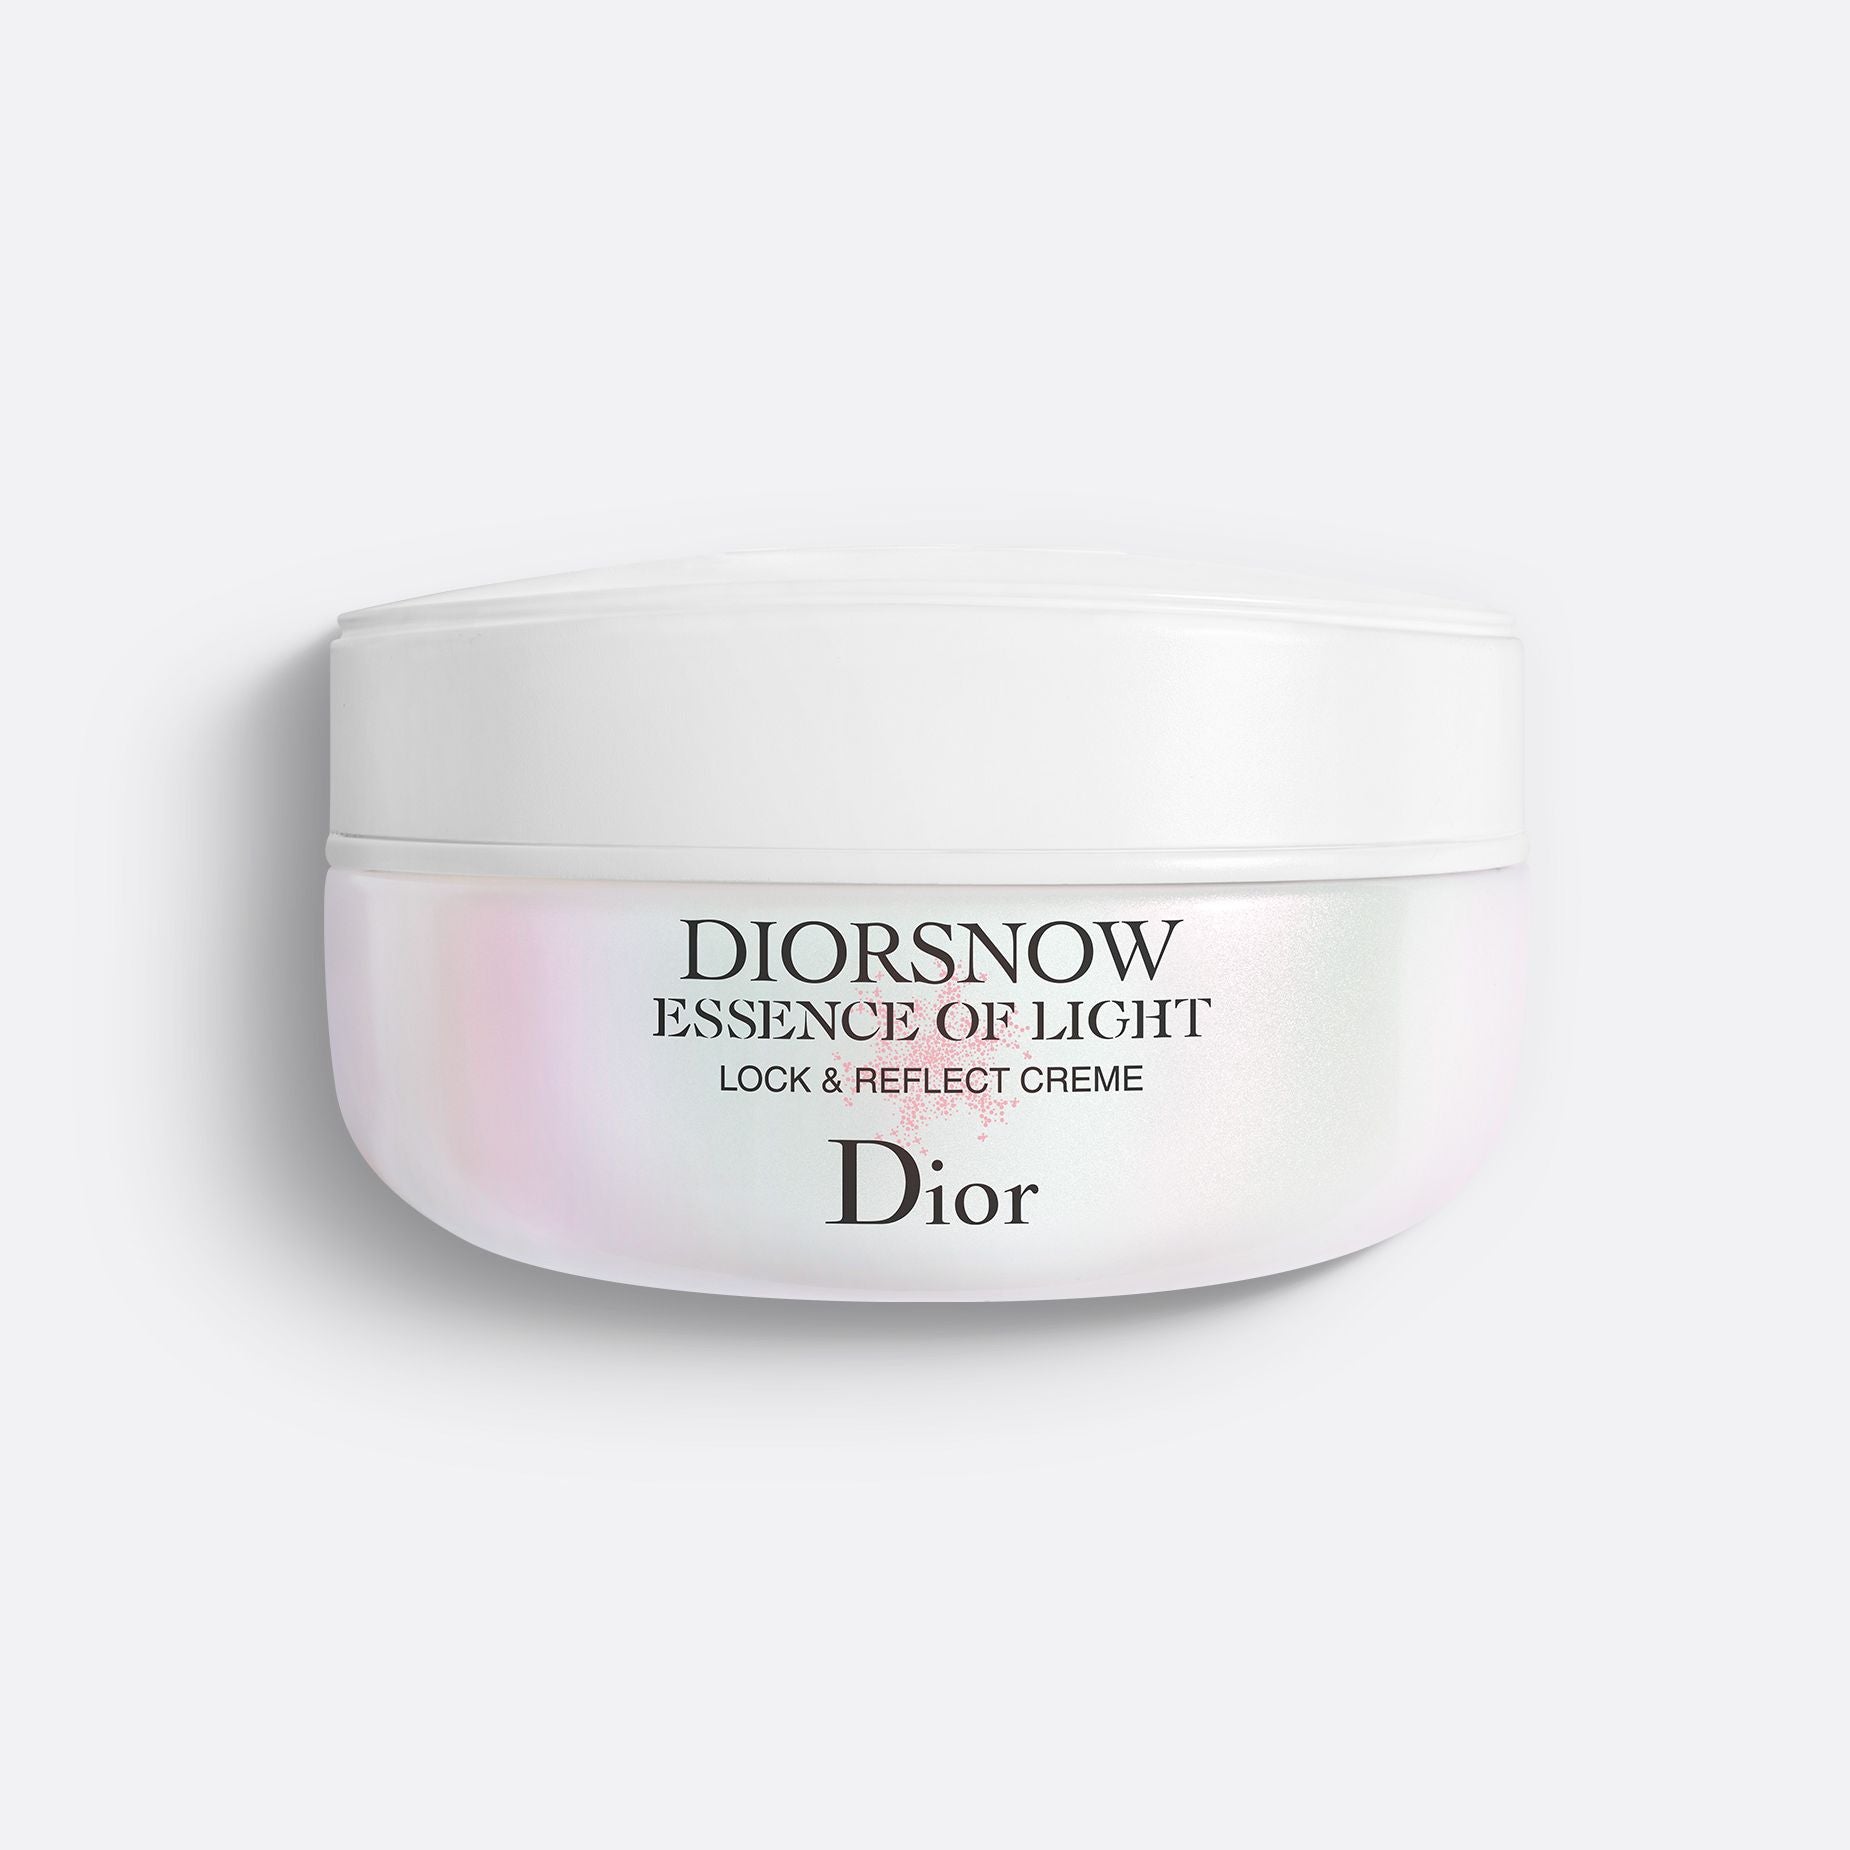 DIORSNOW ESSENCE OF LIGHT LOCK & REFLECT CREME ~ Moisturizing brightening cream for face and neck - illuminates, hydrates and smooths